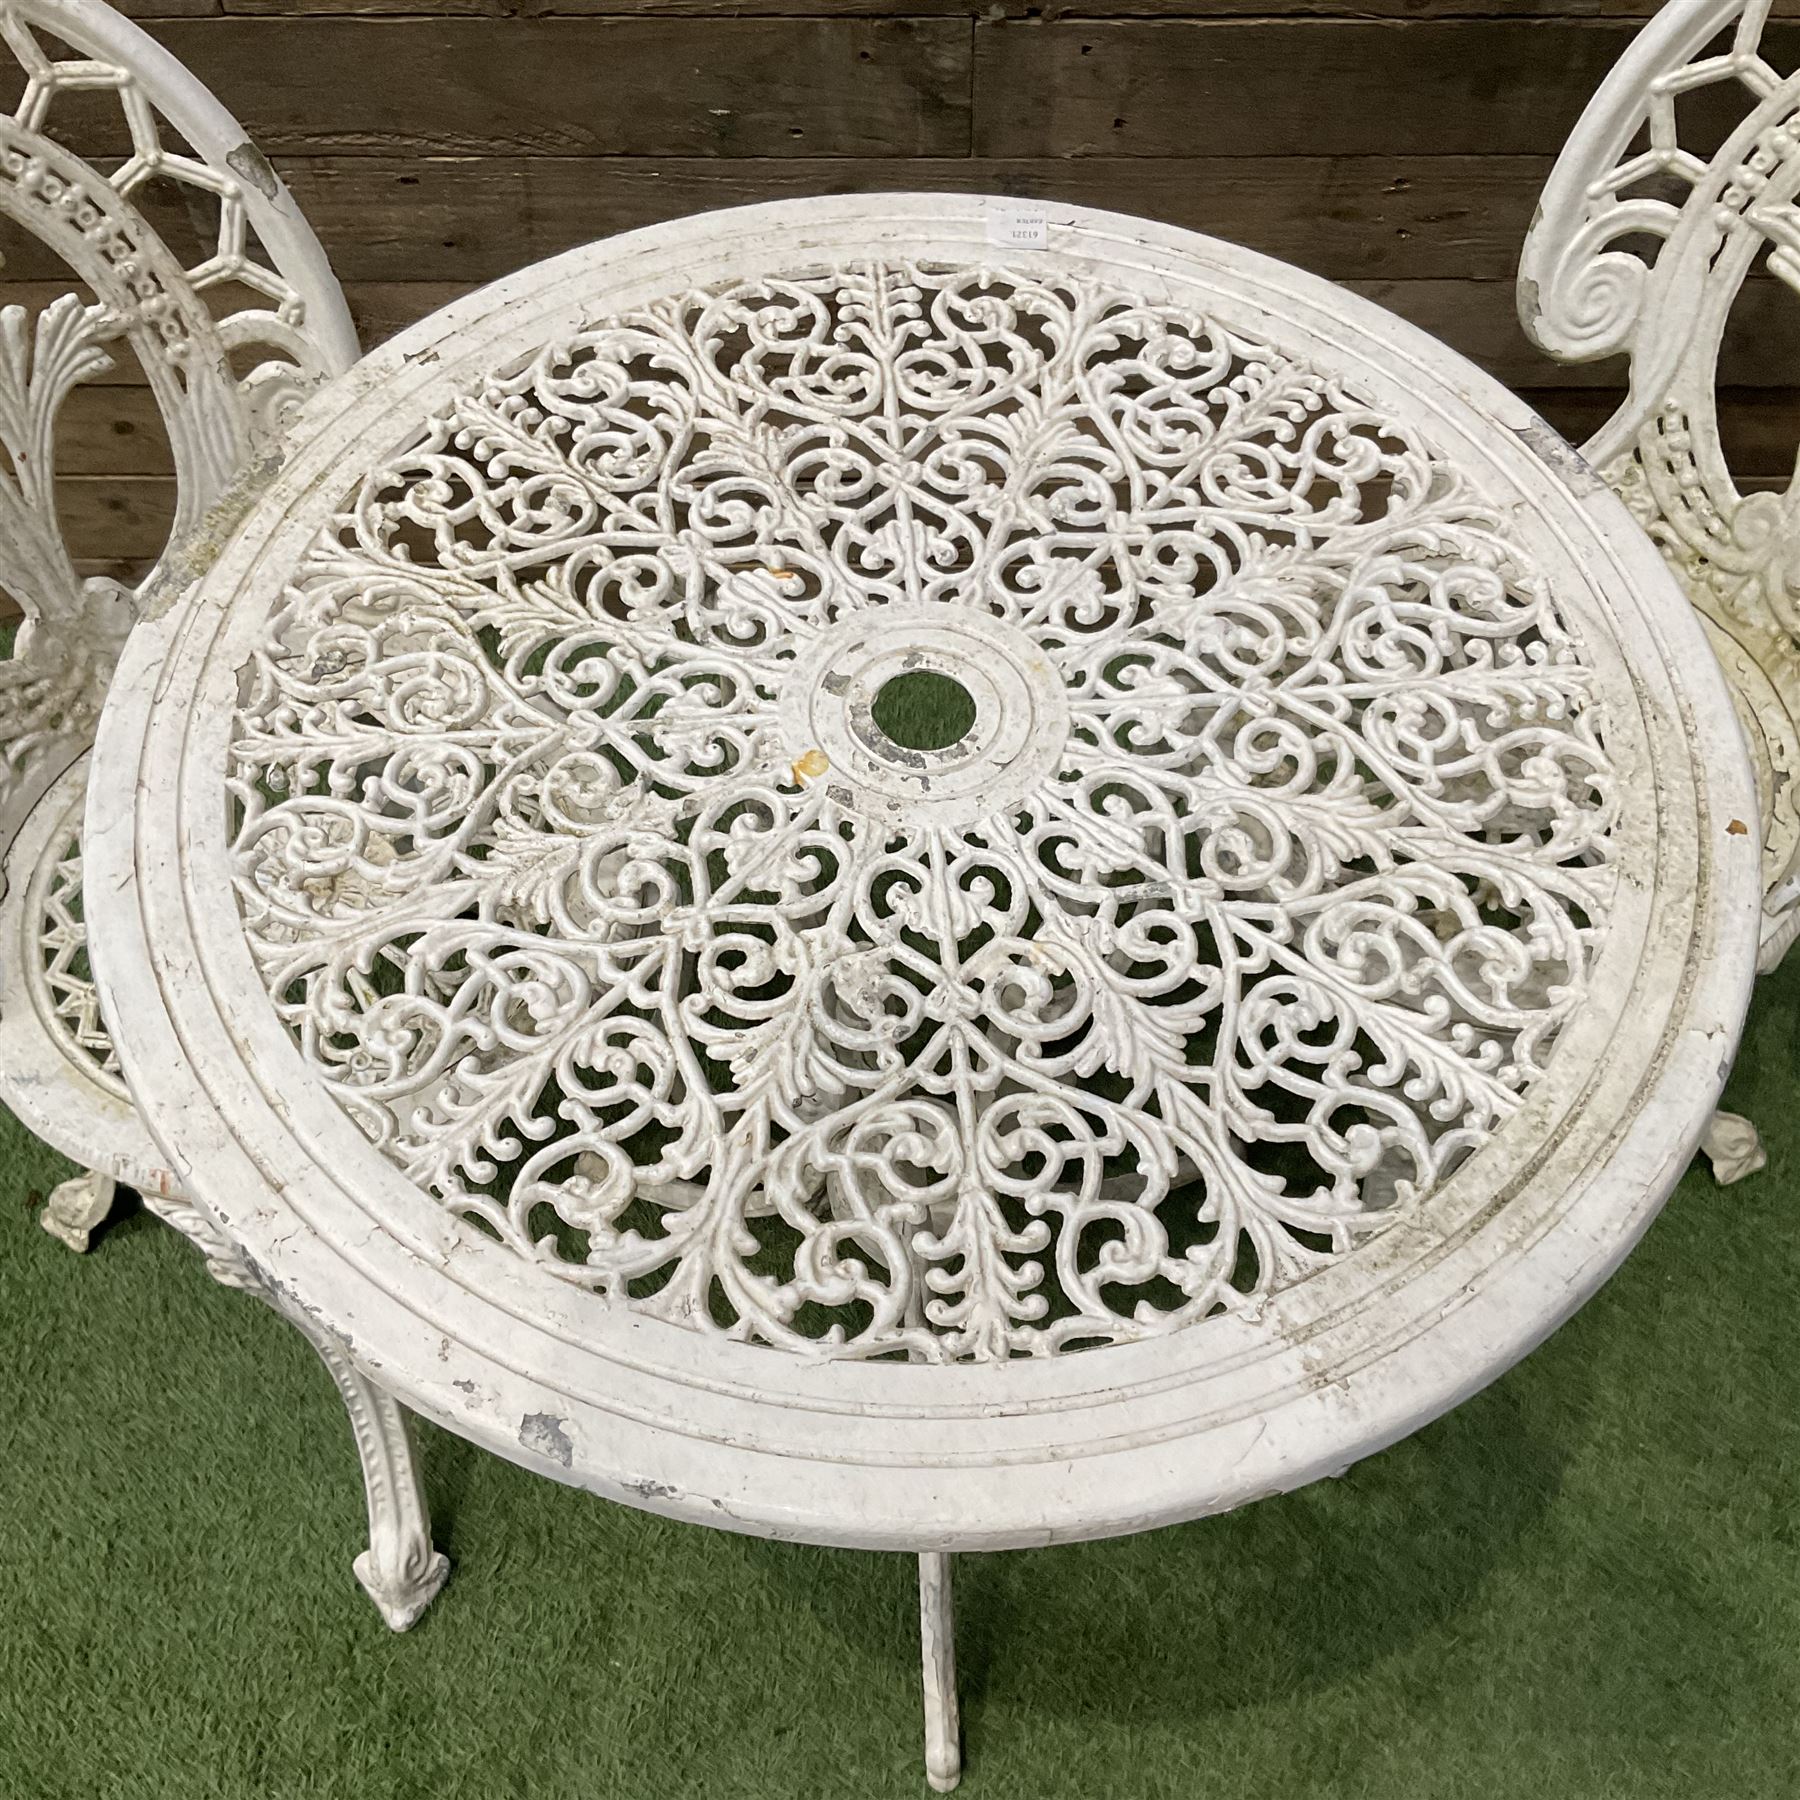 Cast aluminium circular garden table and two chairs - Image 2 of 5